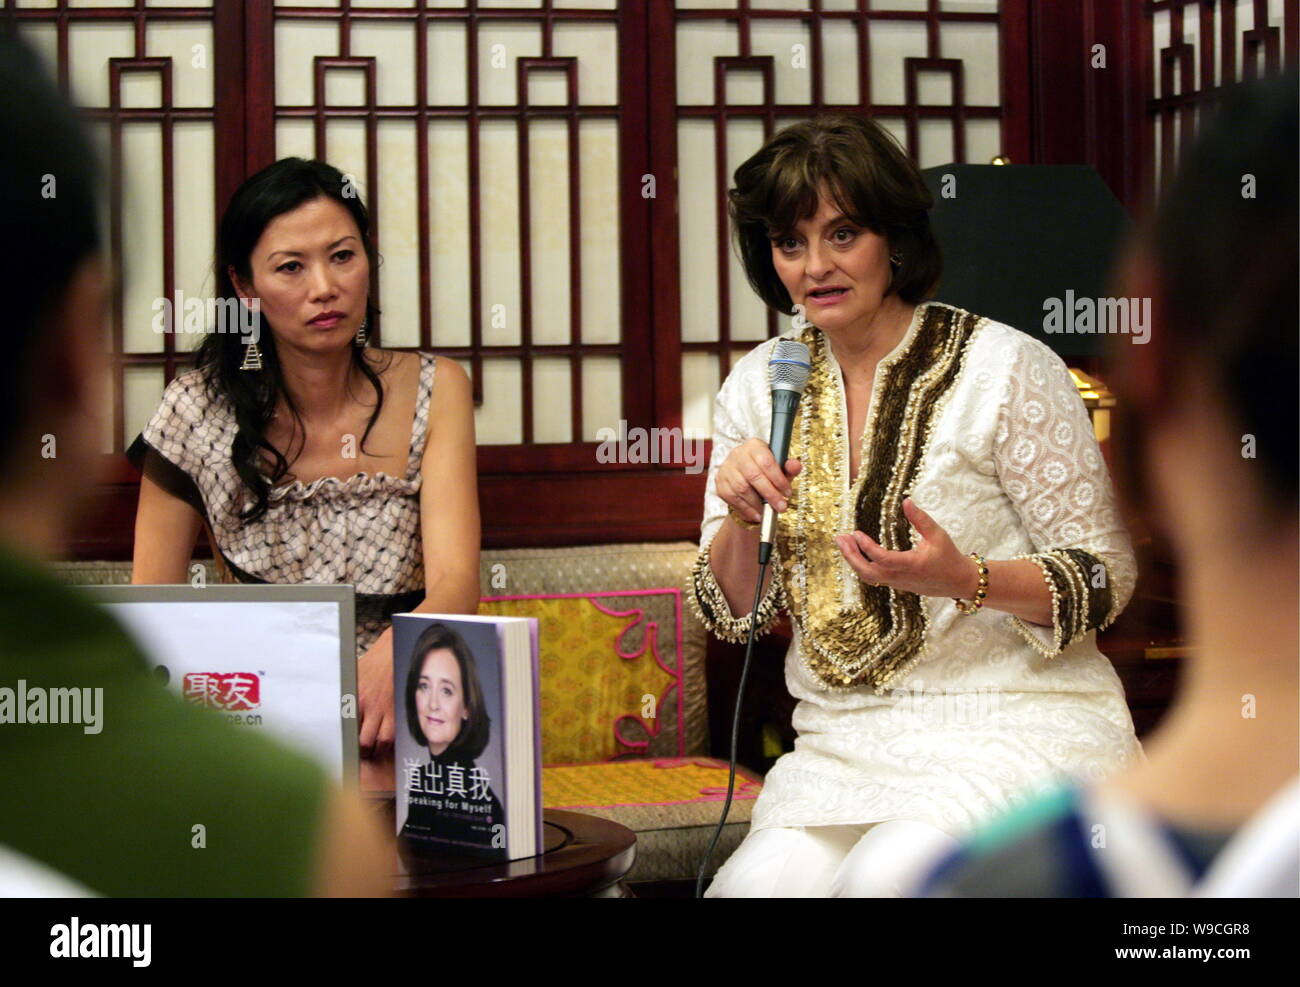 Cherie Blair, right, wife of former British Prime Minister Tony Blair, speaks next to Wendi Deng Murdoch, wife of News Corp. Chairman and CEO Rupert M Stock Photo